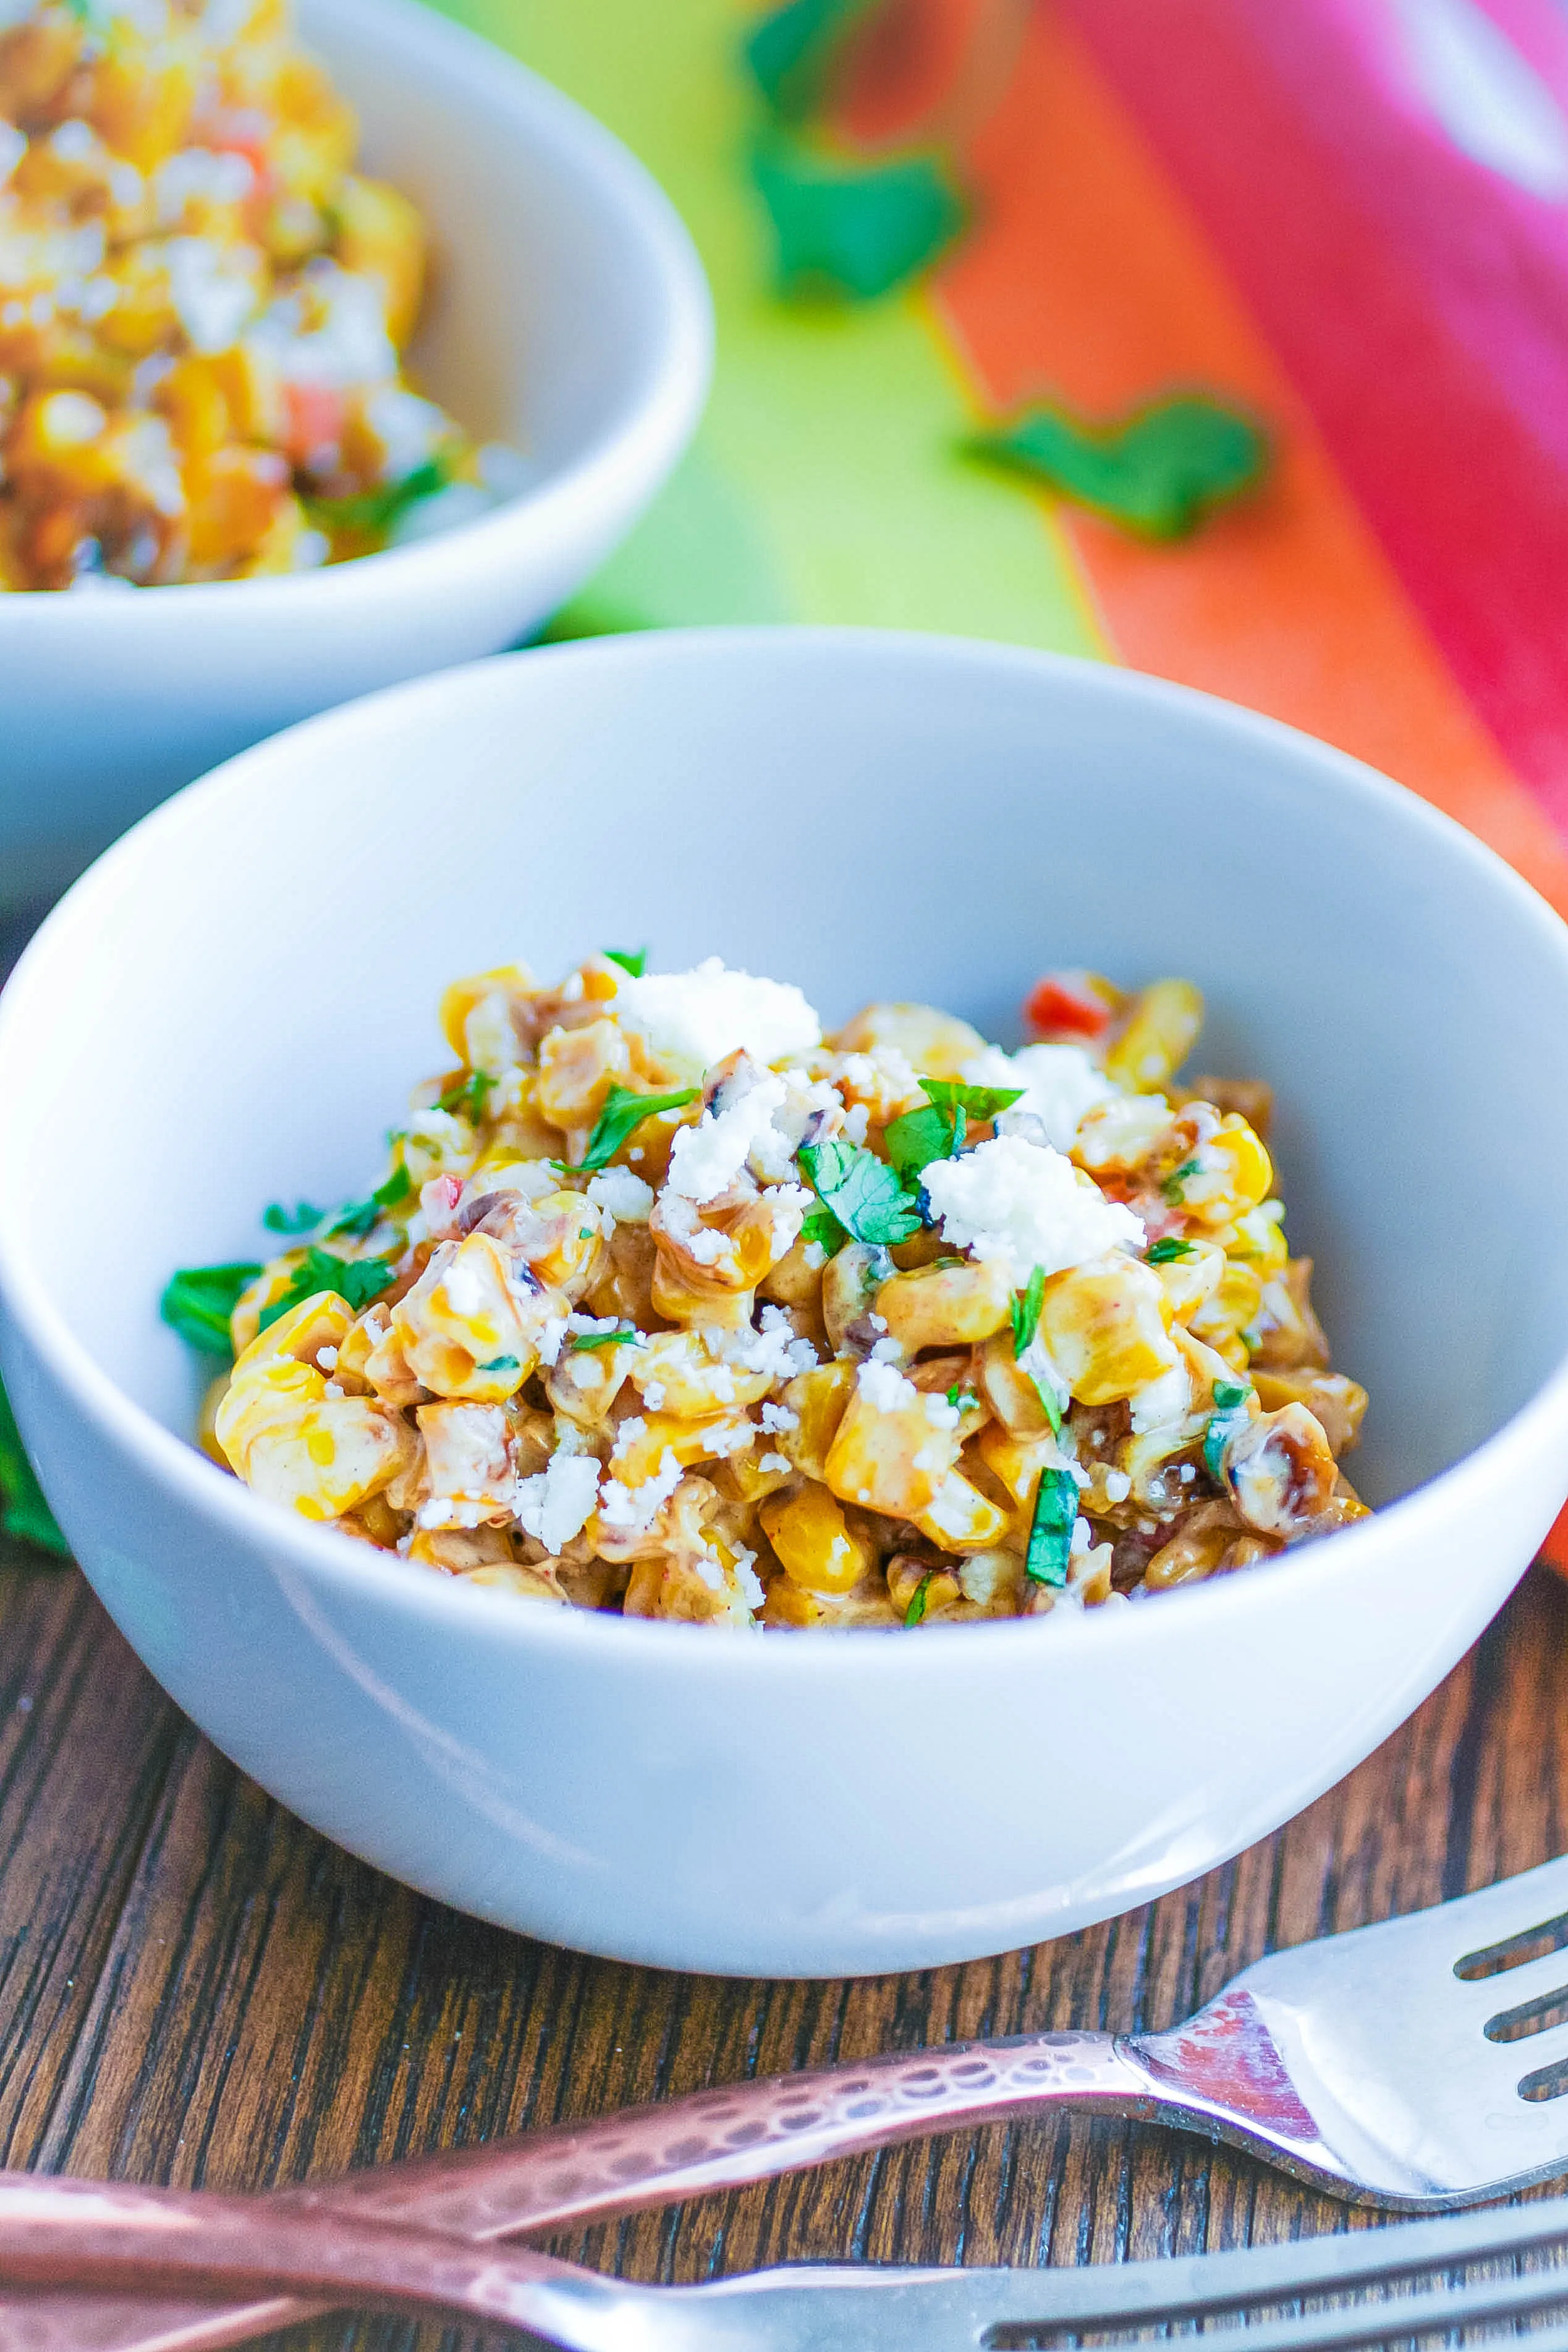 Mexican Street Corn Salad is the ideal side dish for the season. Everyone will enjoy Mexican Street Corn Salad this summer!